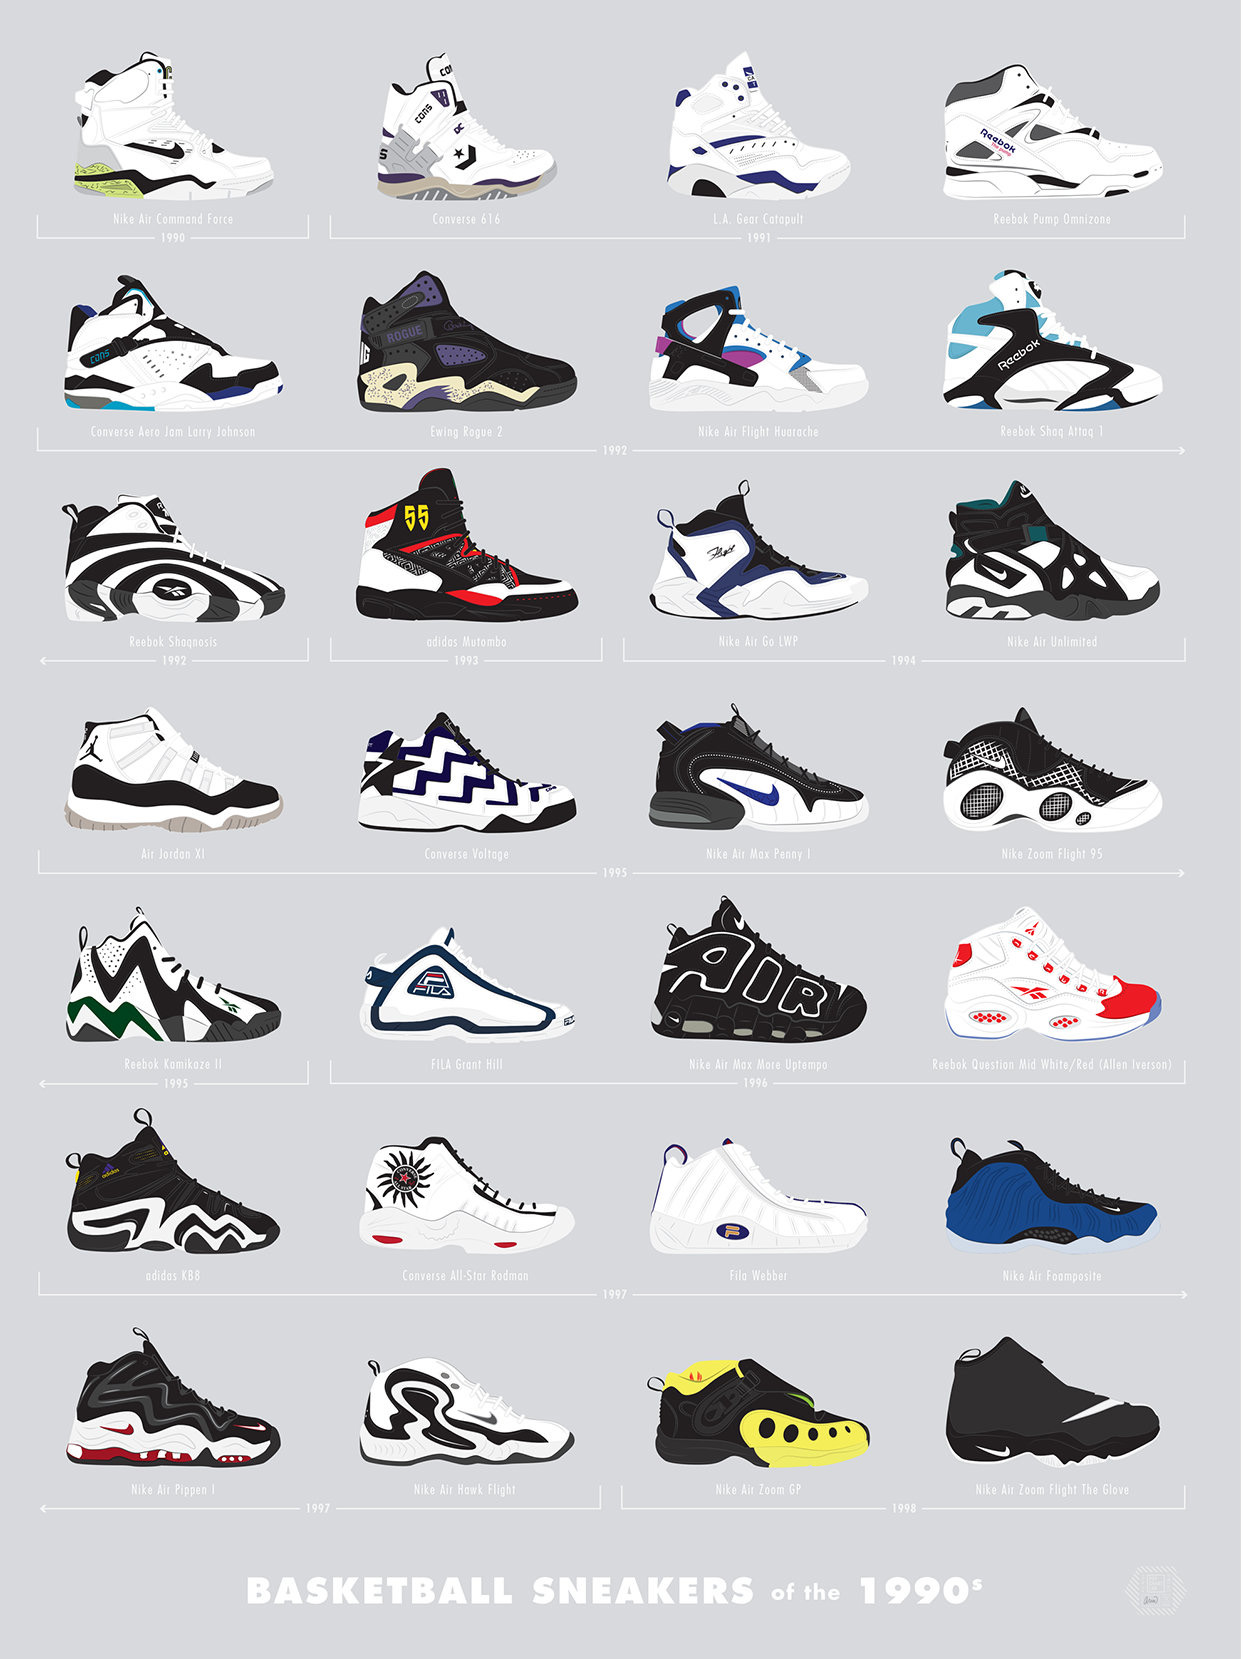 Iconic Basketball And Running Sneakers From The ’80s And ’90s